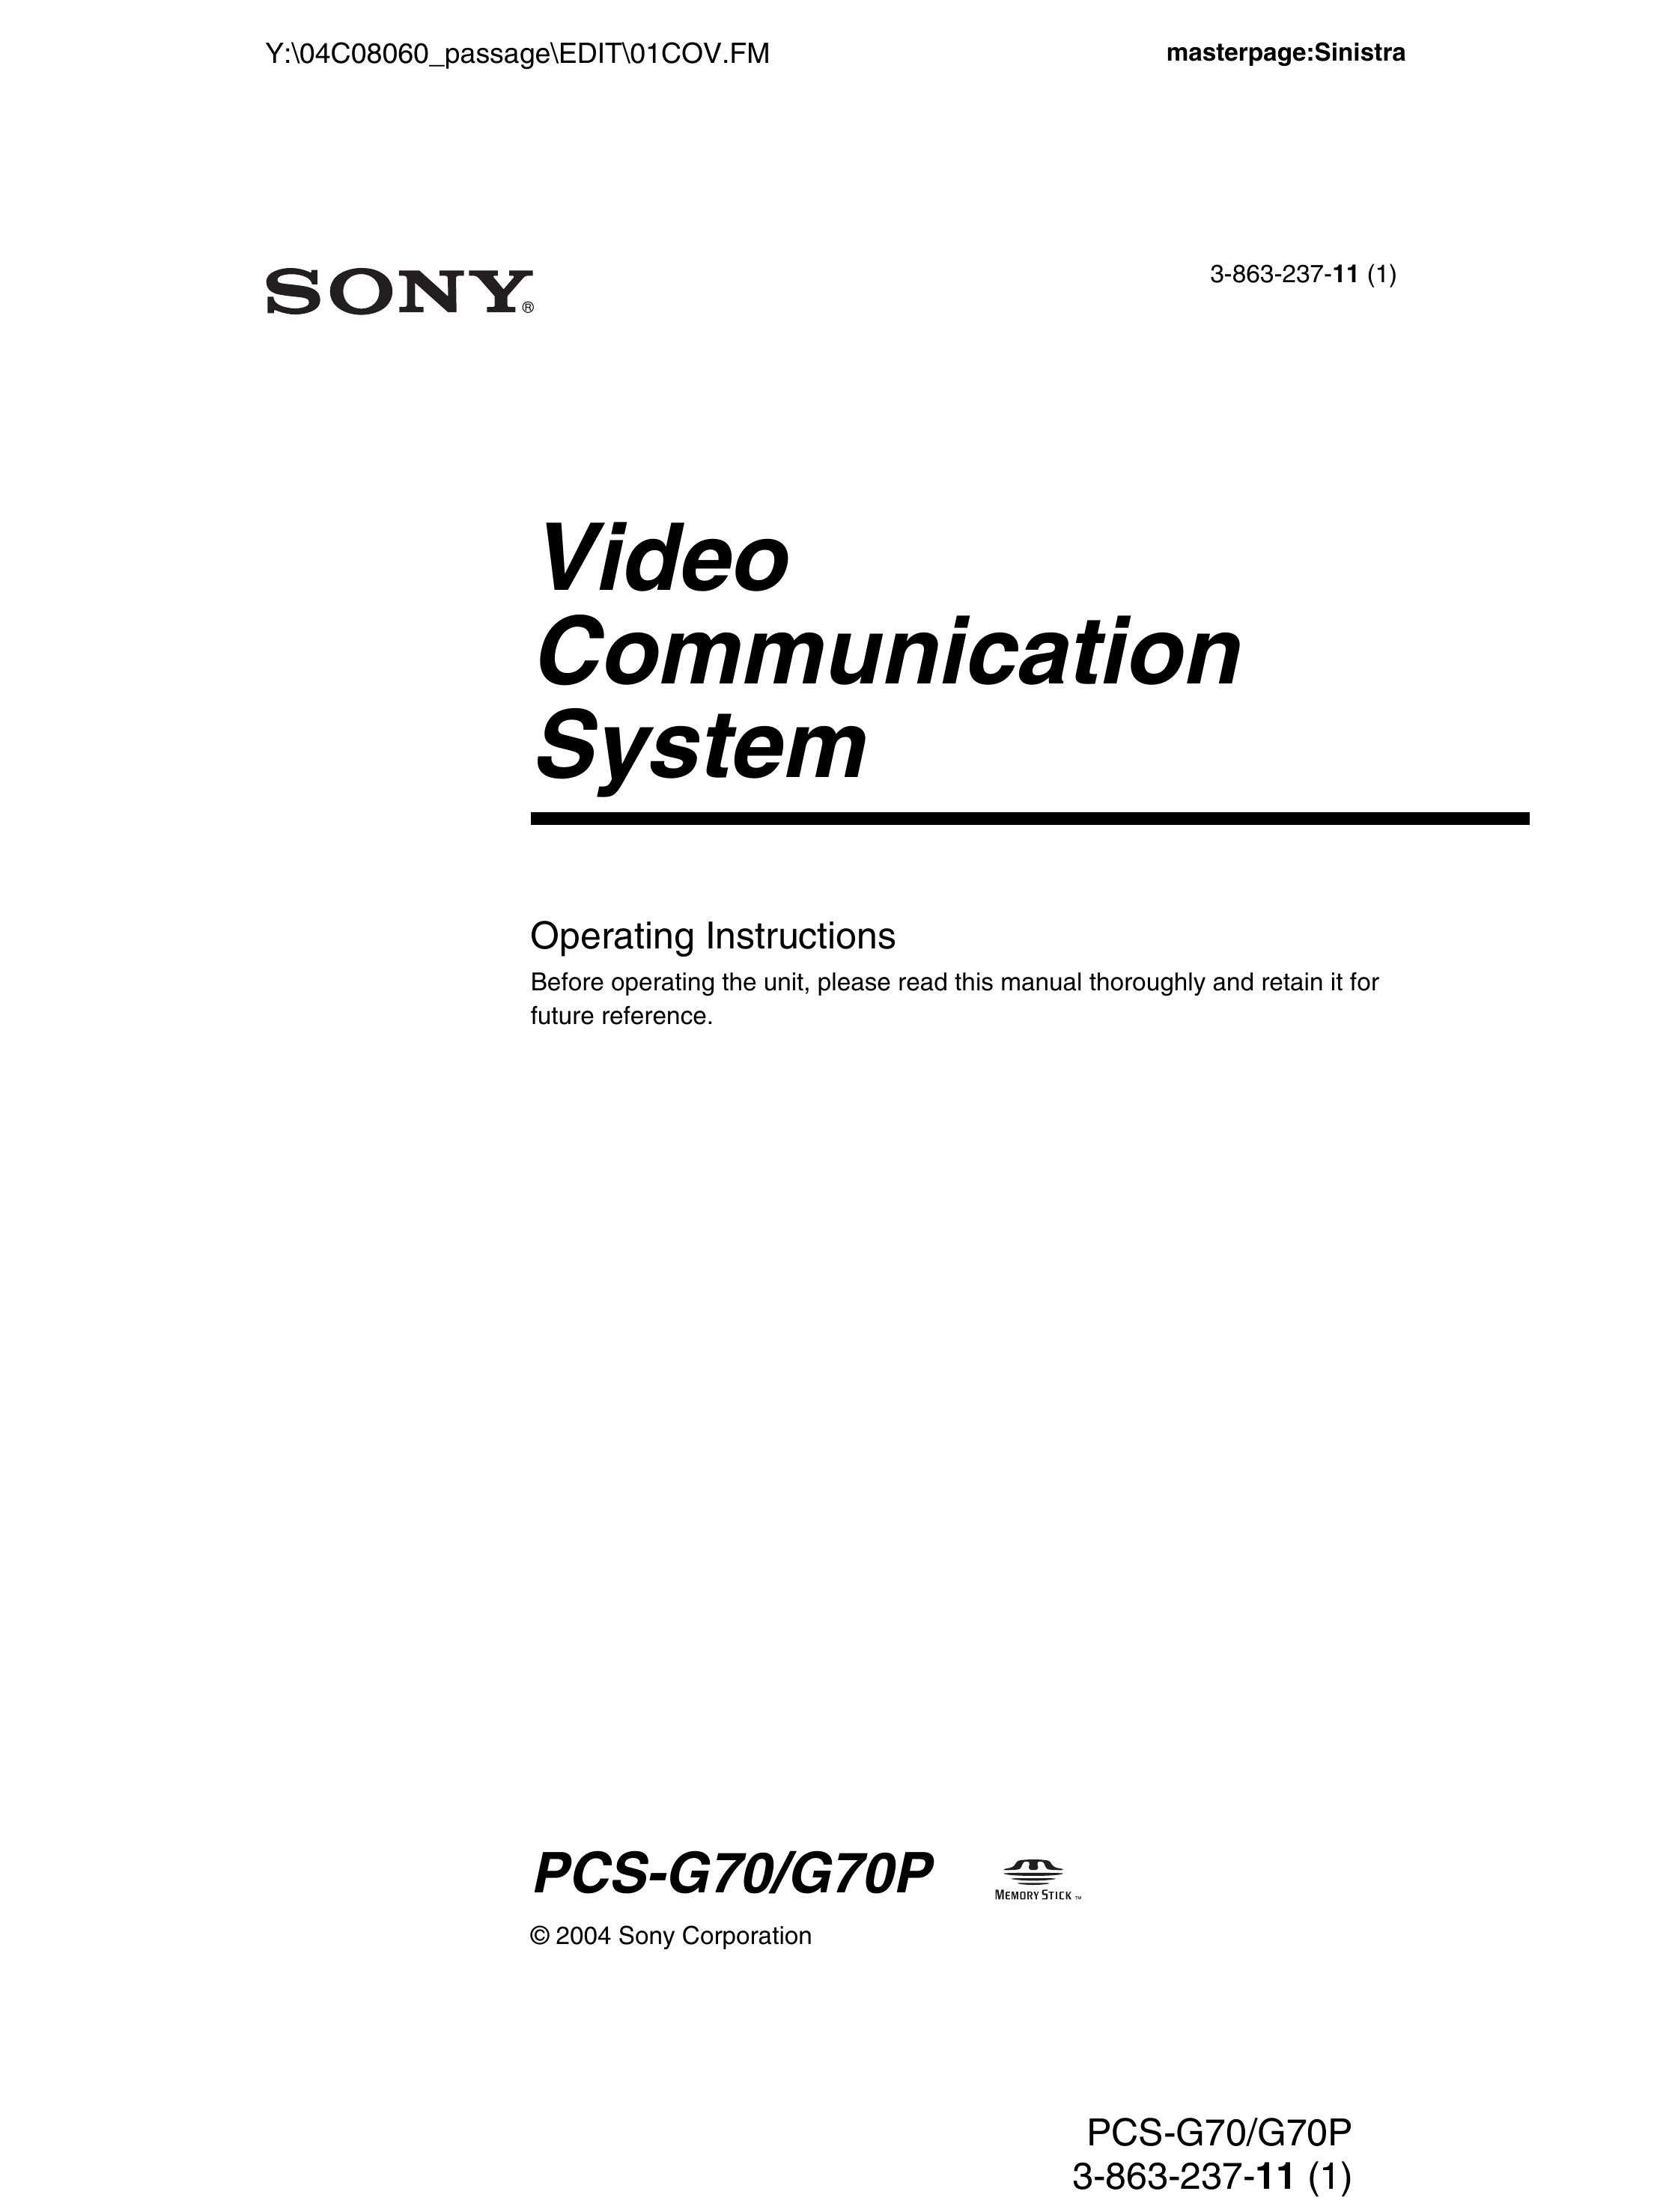 Sony PCS-G70P Trimmer User Manual